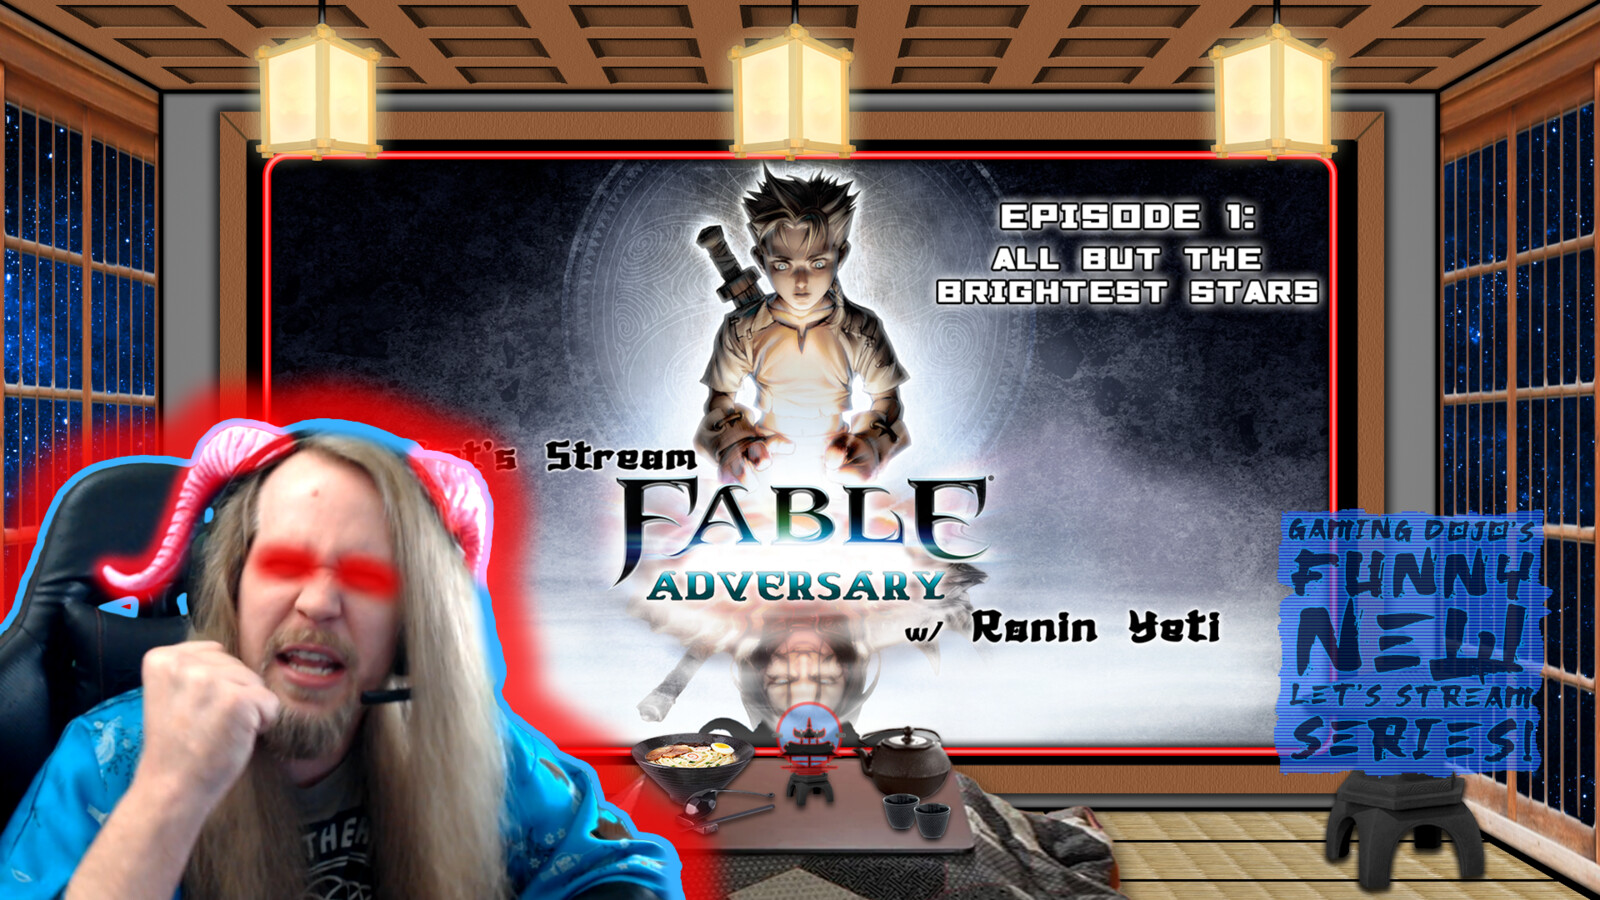 Let's Stream "Fable: Adversary" Episode 1 Image | Ronin Yeti Twitch Streaming